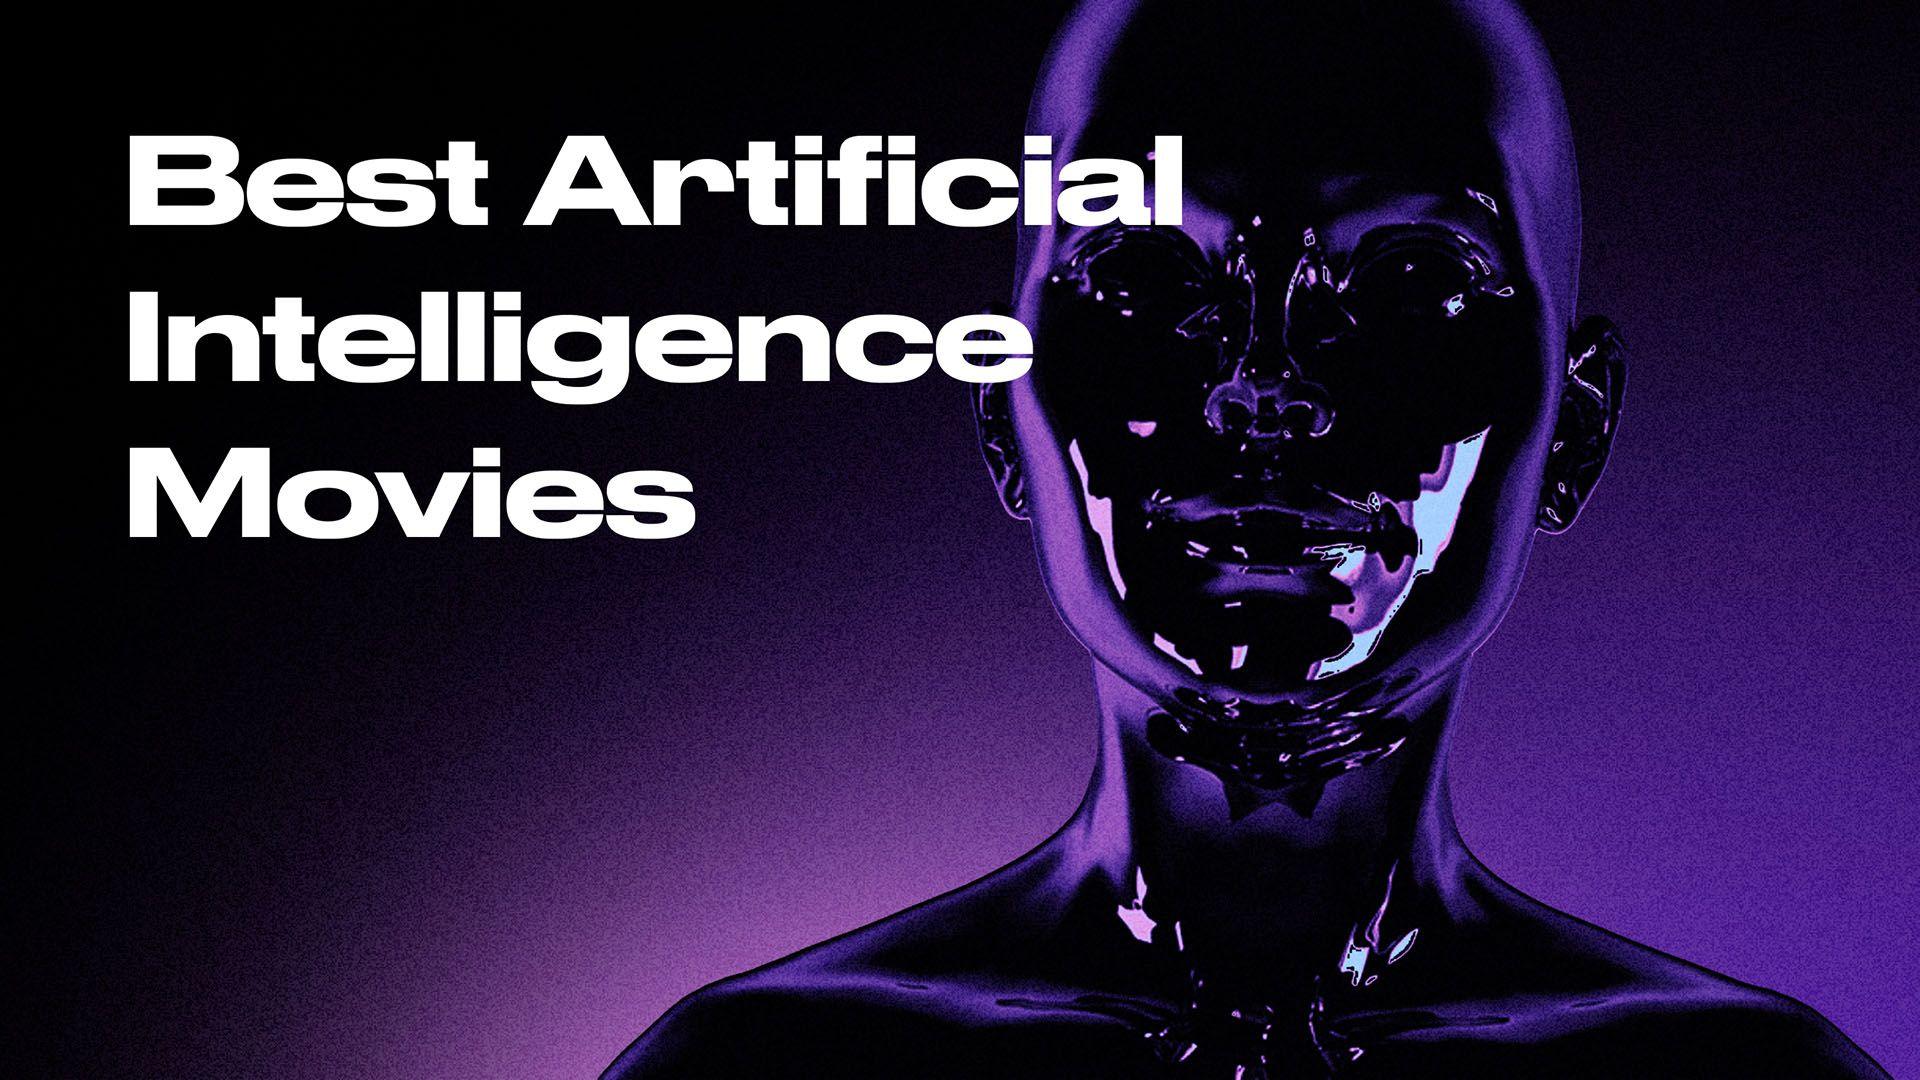 Best Artificial Intelligence Movies in 2022